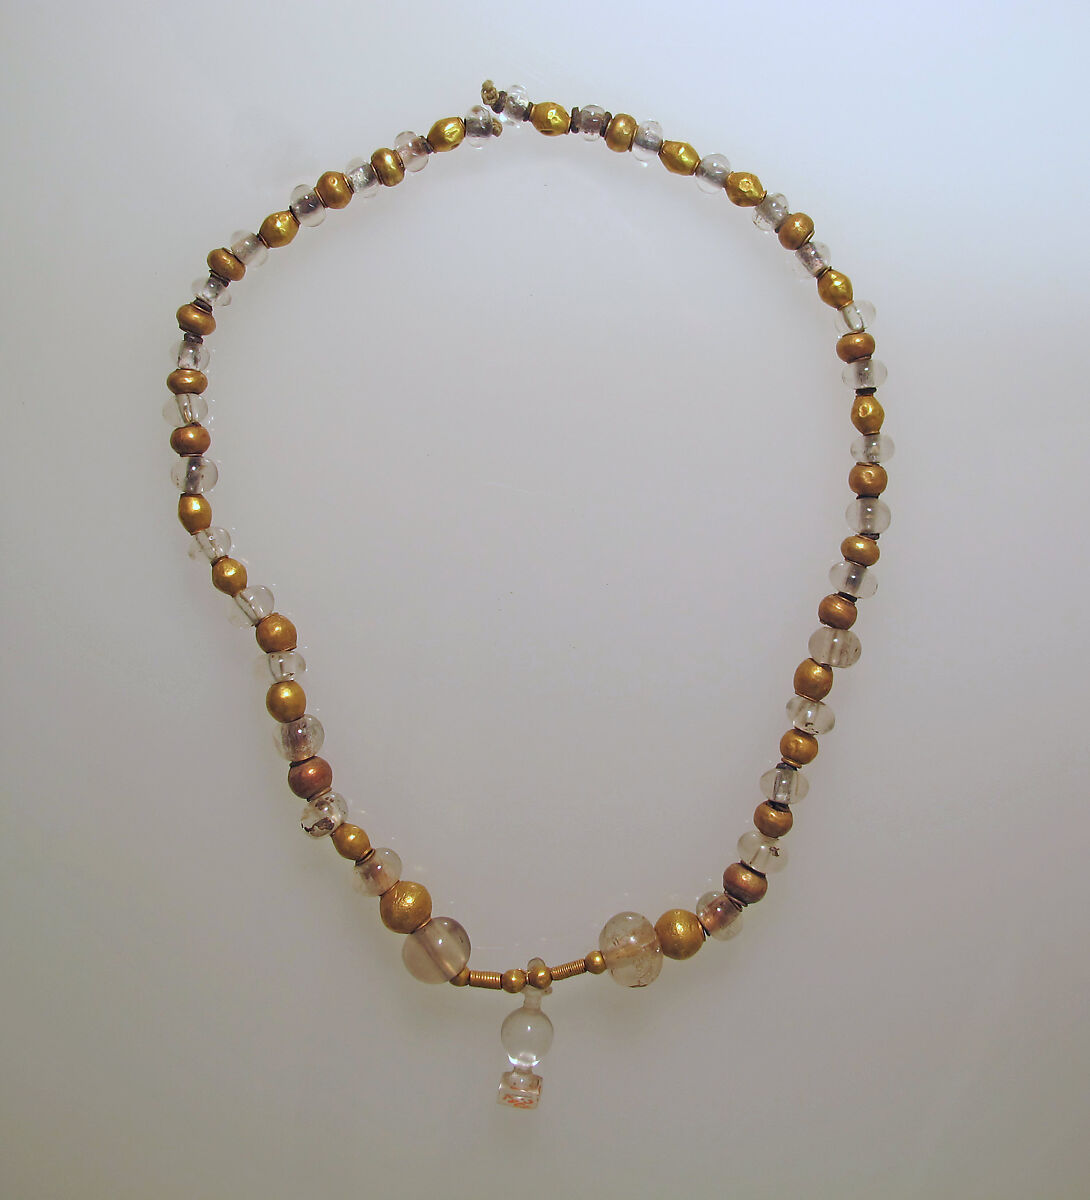 Necklace with crystal beads, Gold, rock crystal, Cypriot 